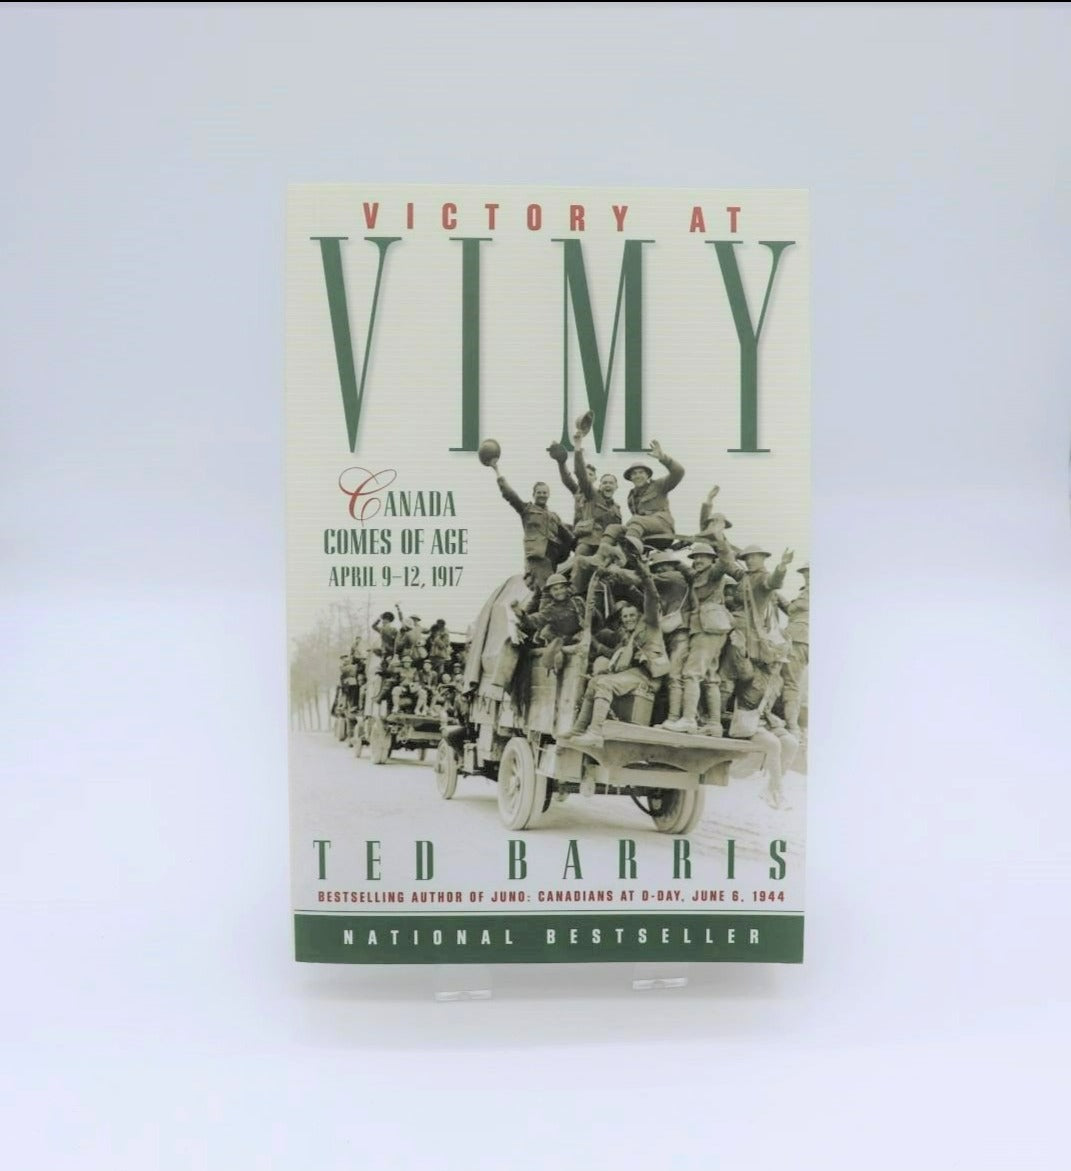 Barris's Victory at Vimy